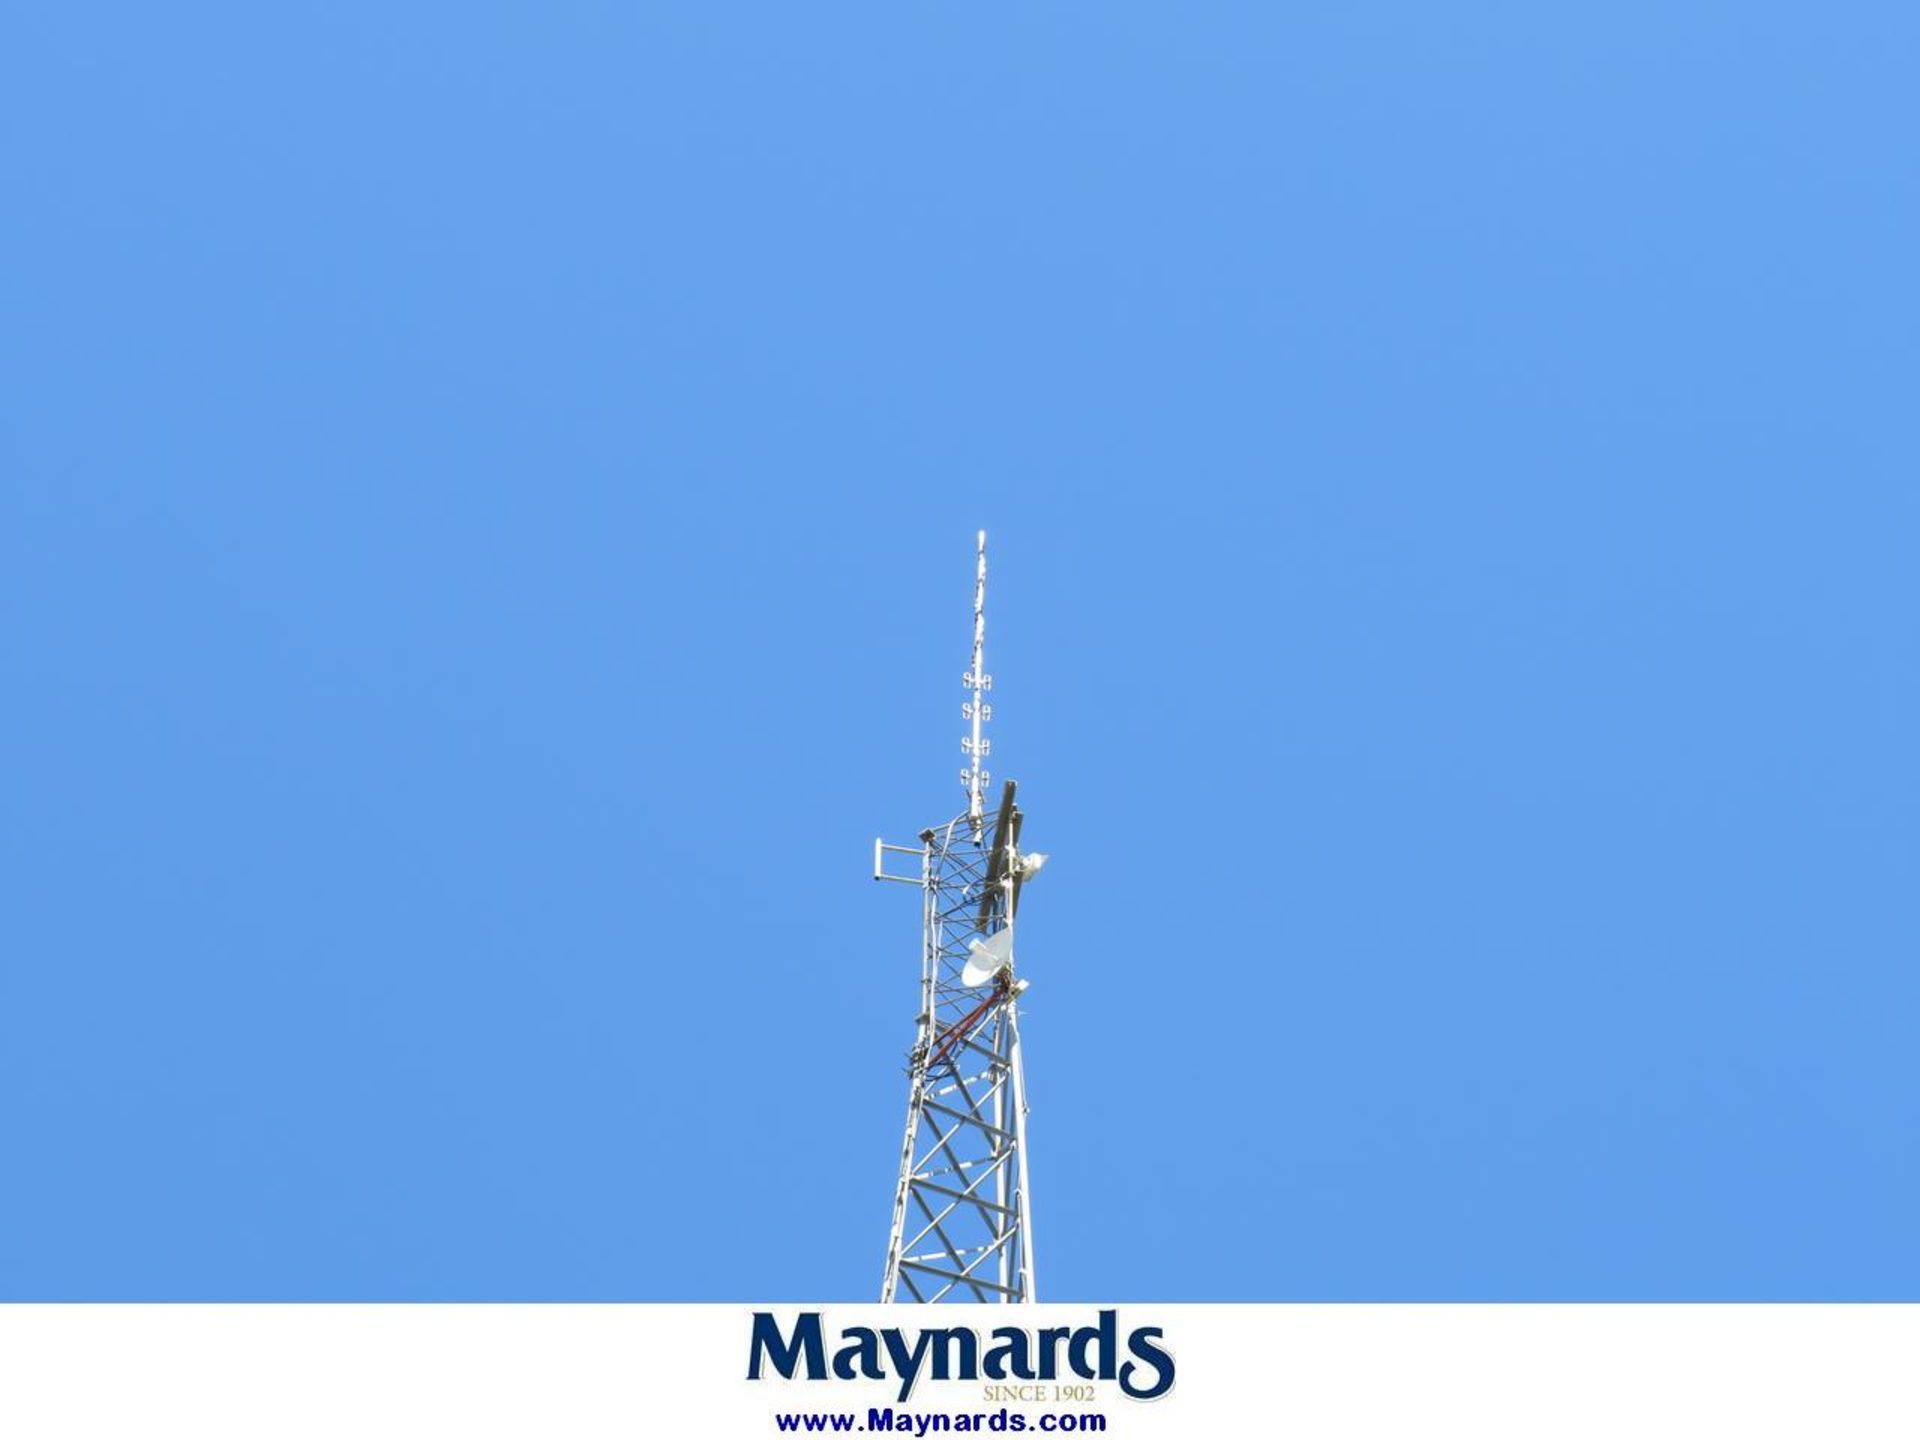 Approx. 200' High Communications Tower - Image 5 of 8